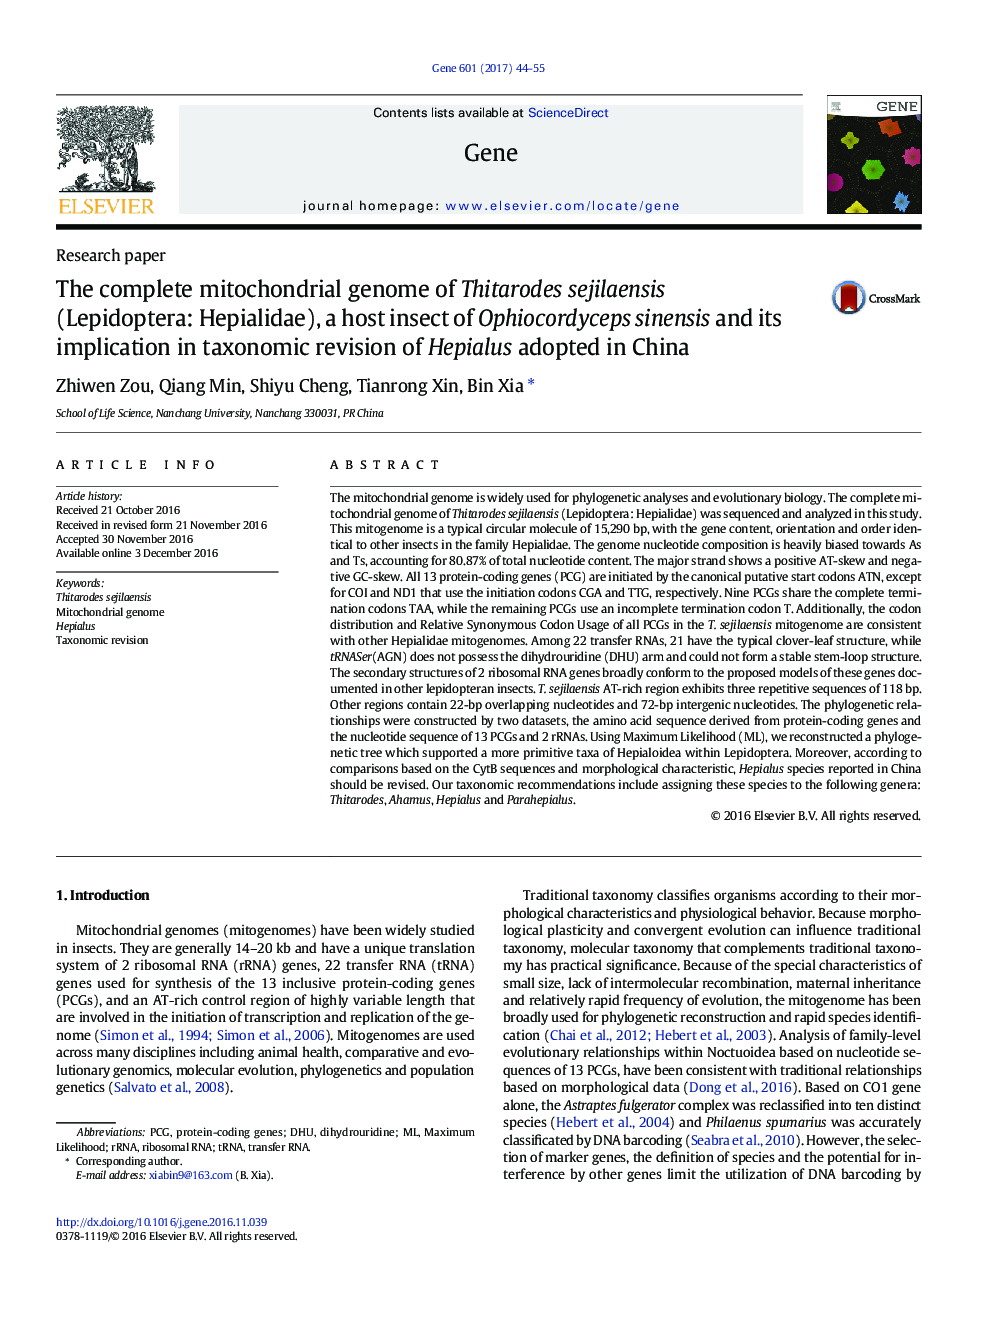 The complete mitochondrial genome of Thitarodes sejilaensis (Lepidoptera: Hepialidae), a host insect of Ophiocordyceps sinensis and its implication in taxonomic revision of Hepialus adopted in China